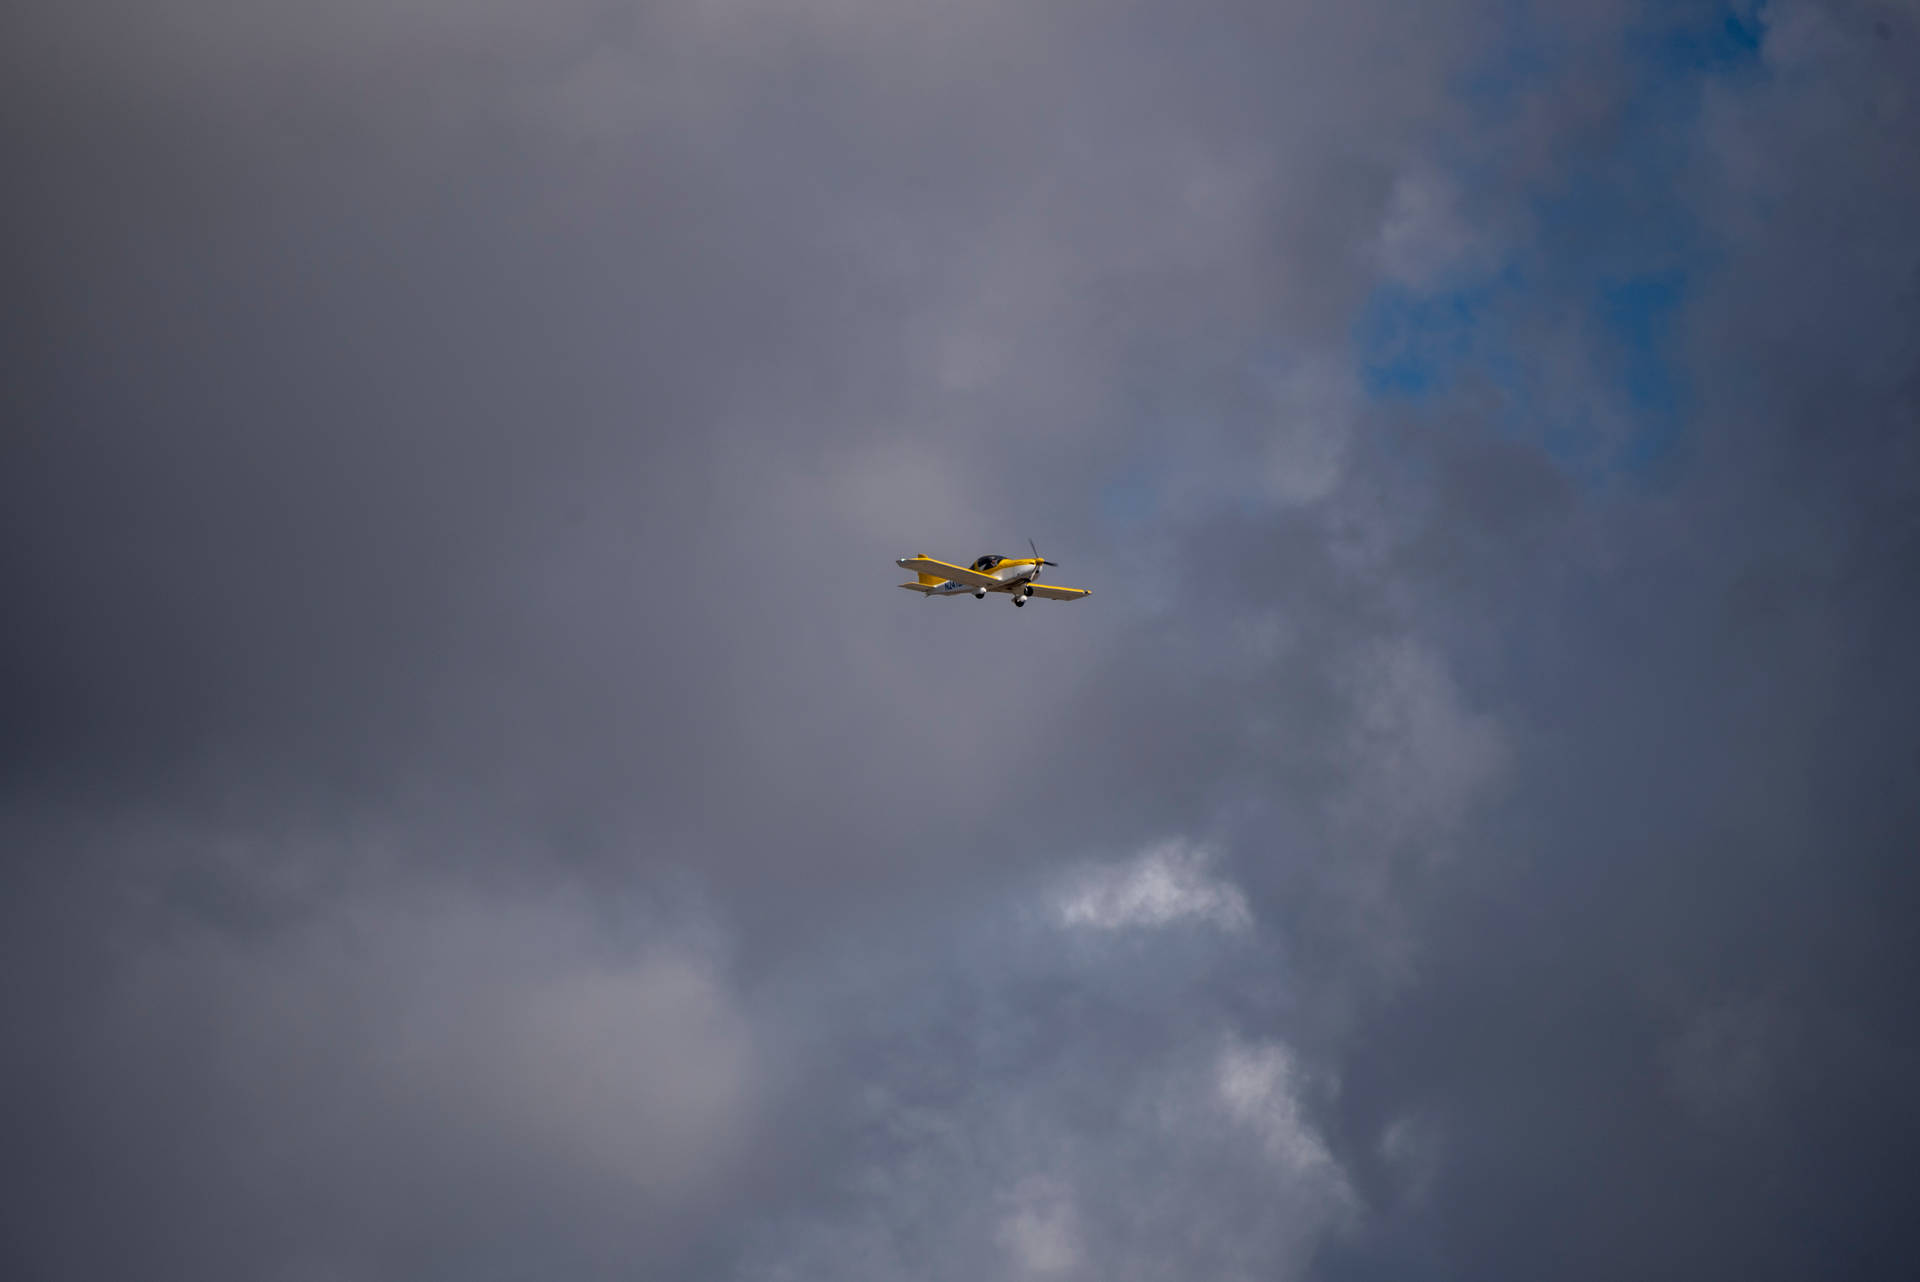 Freedom in the Sky: Small Yellow Plane Soaring High Wallpaper